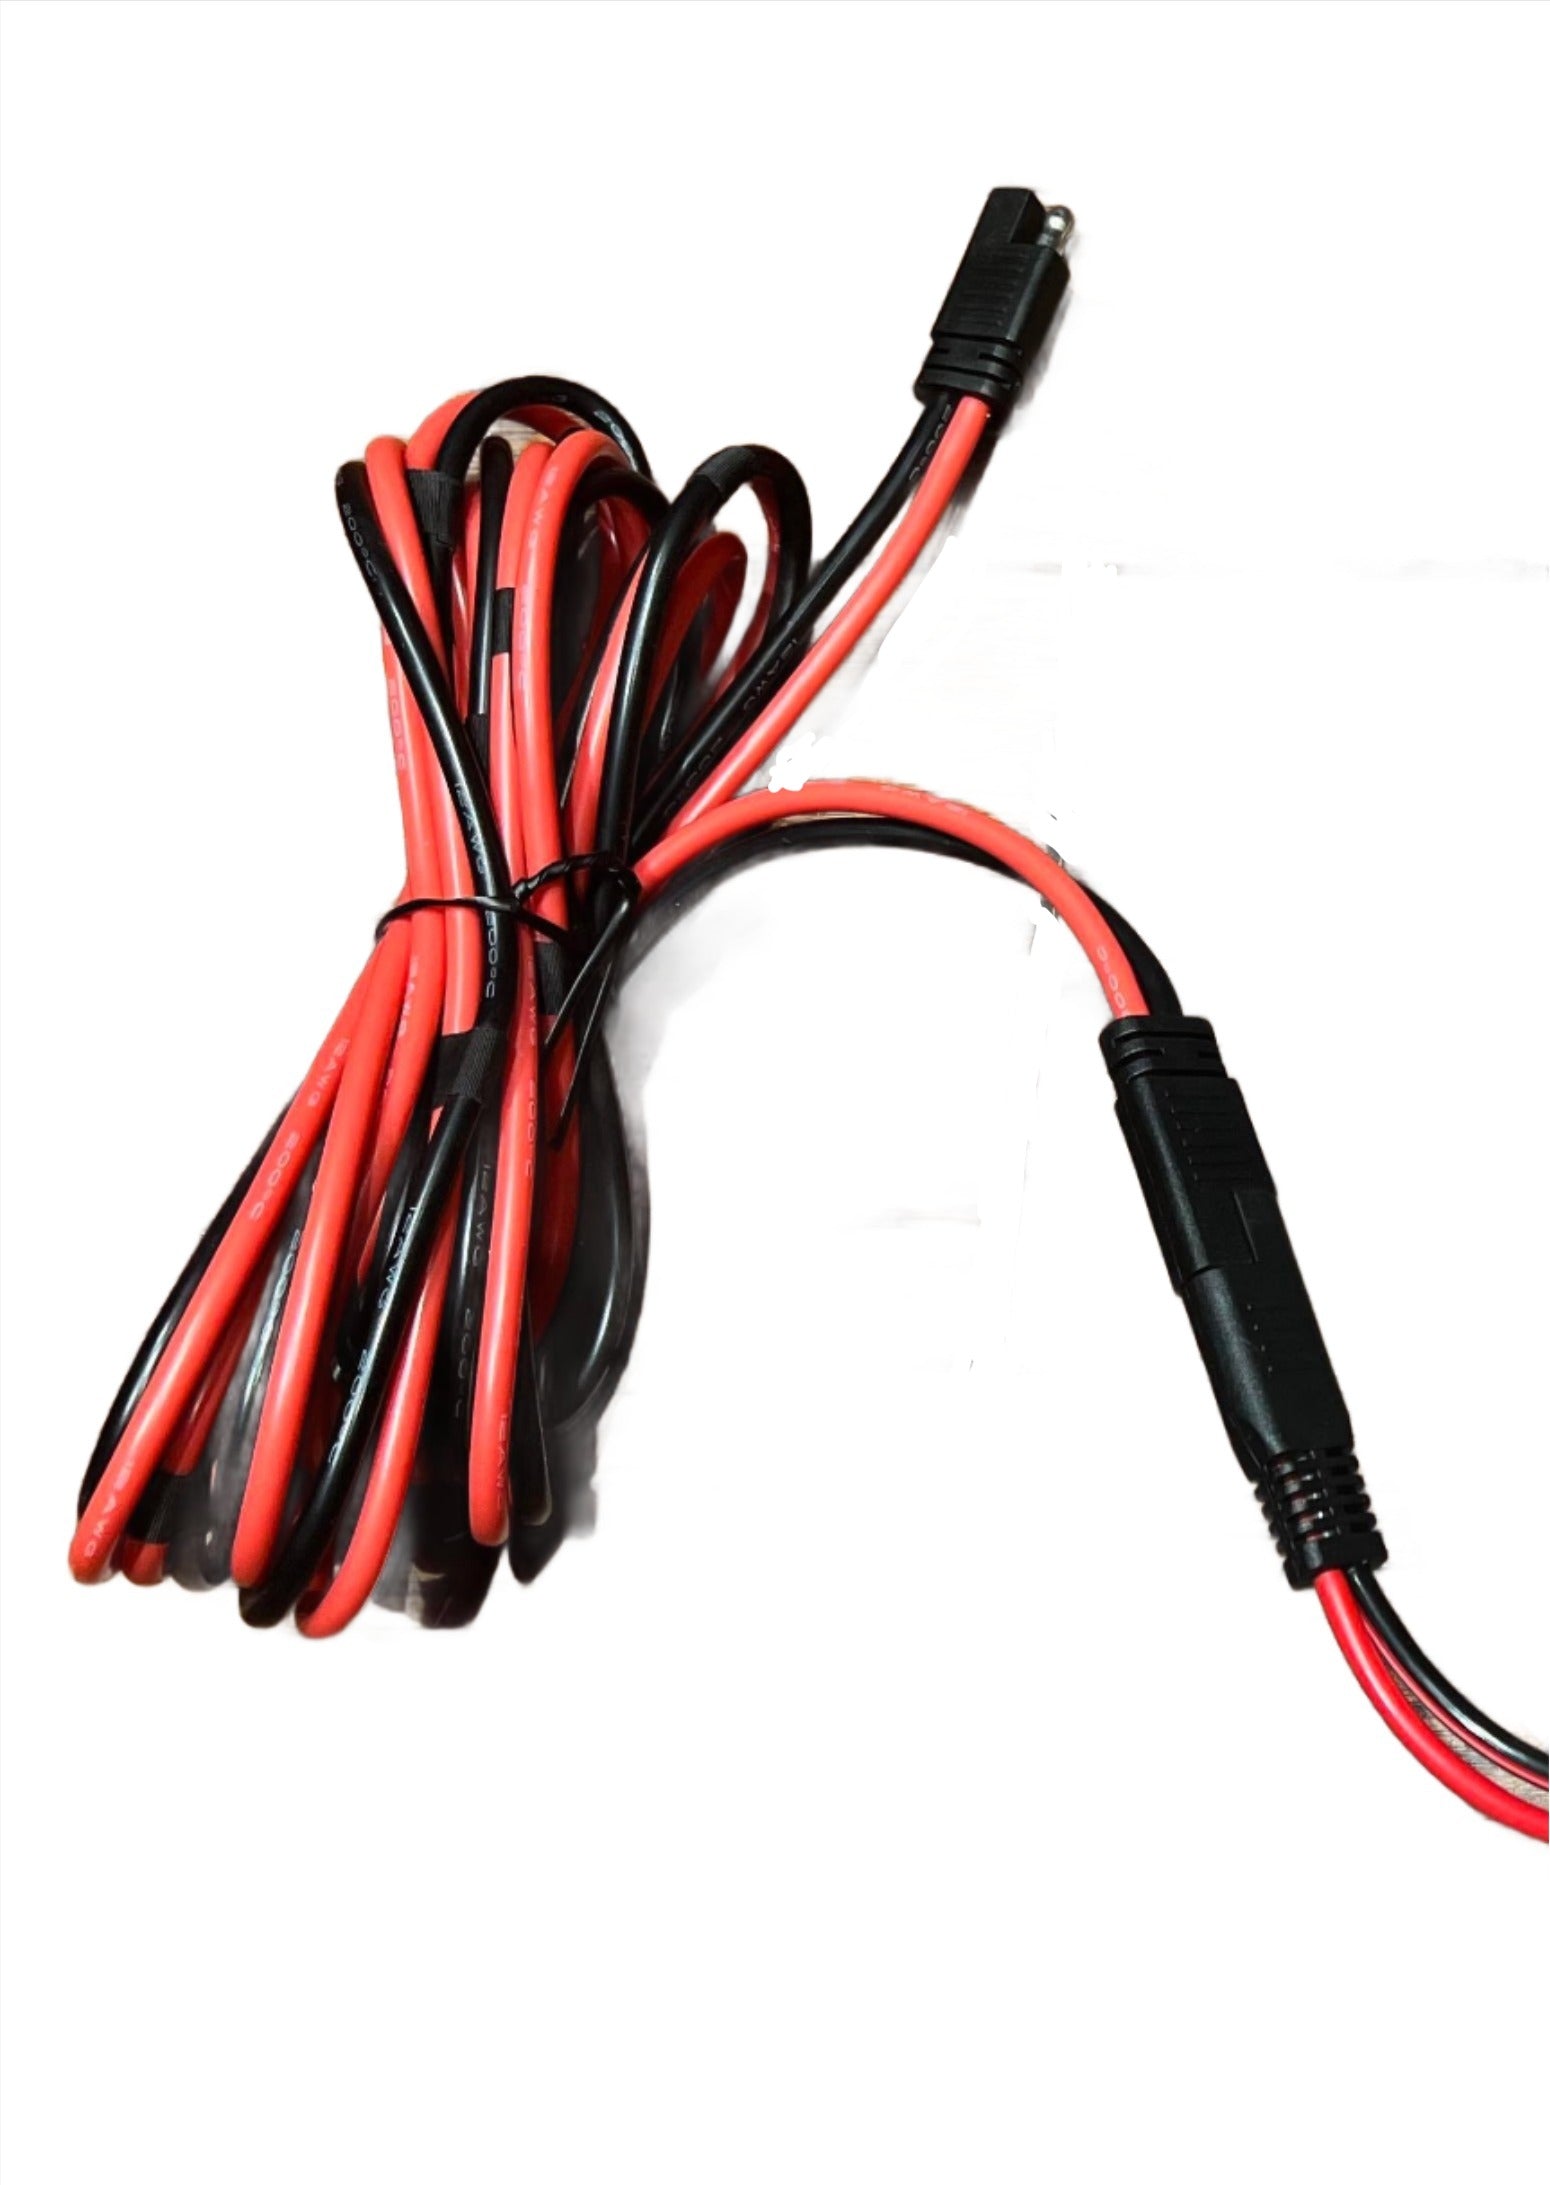 DC Power Cable for All in One 12v Star-Mount Version 2 (No Step Up on Cable)